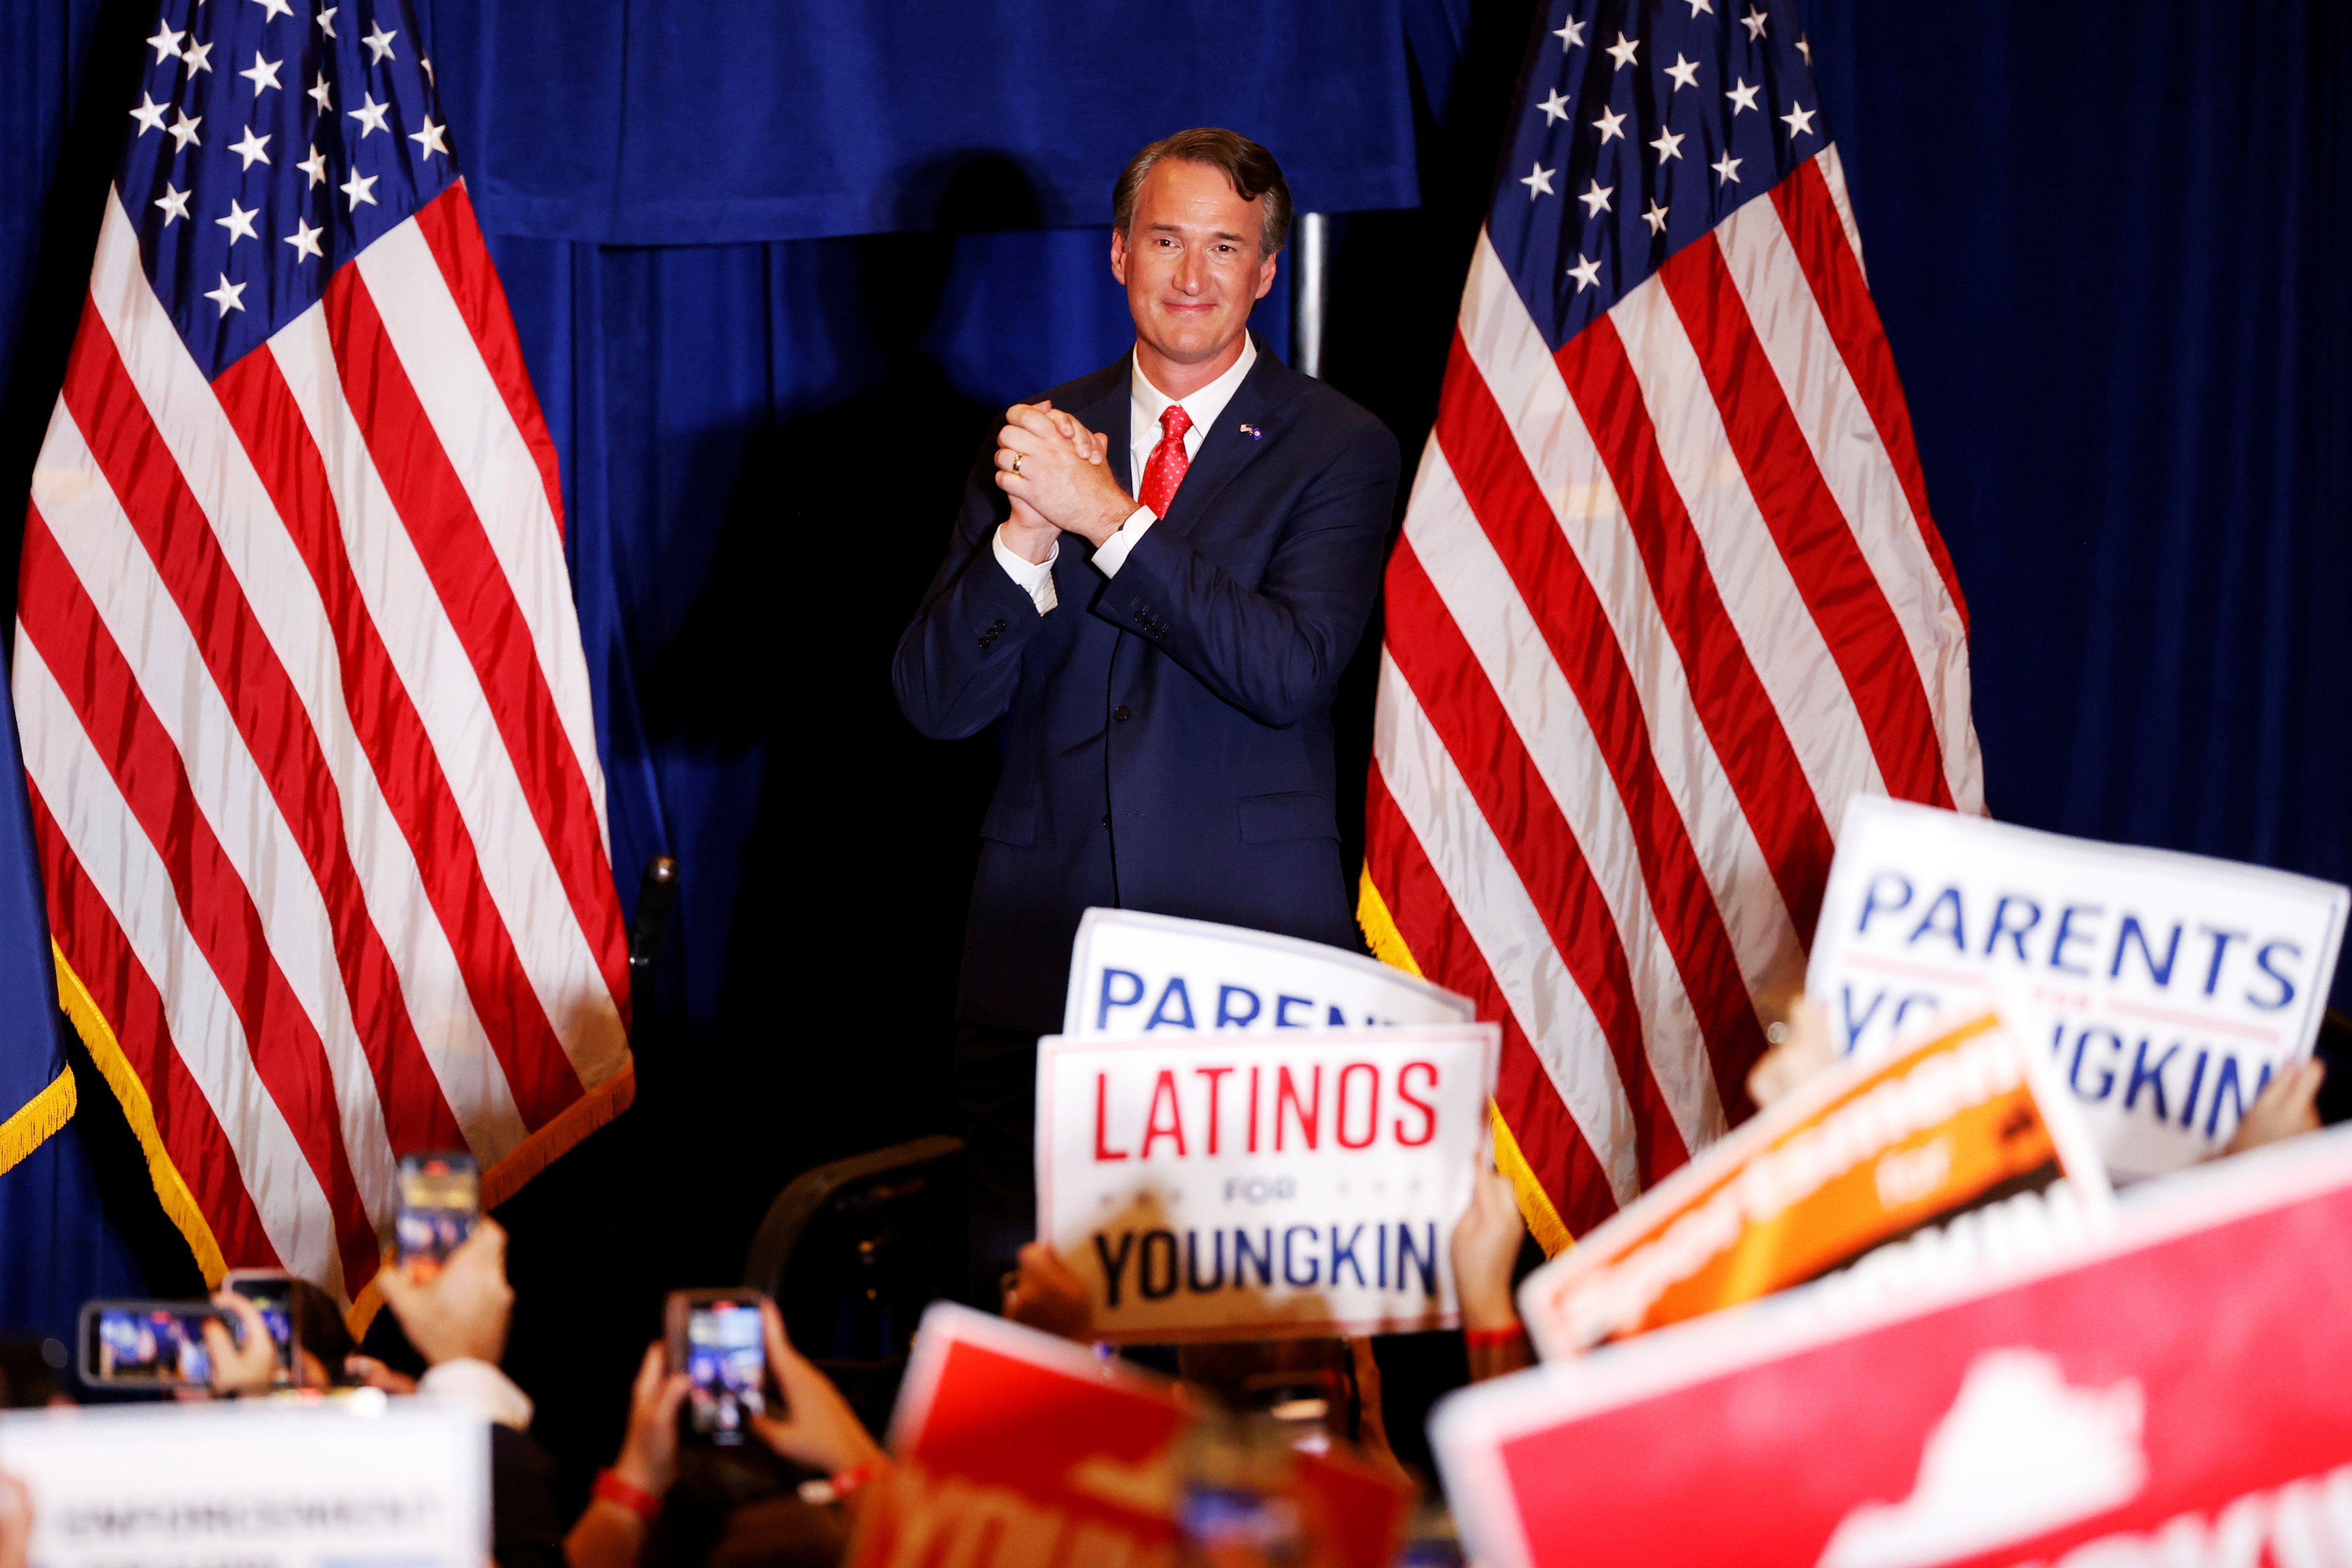 Virginia Republican gubernatorial nominee Glenn Youngkin speaks during his election night party at a hotel in Chantilly, Virginia, U.S., November 3, 2021. REUTERS/Jonathan Ernst